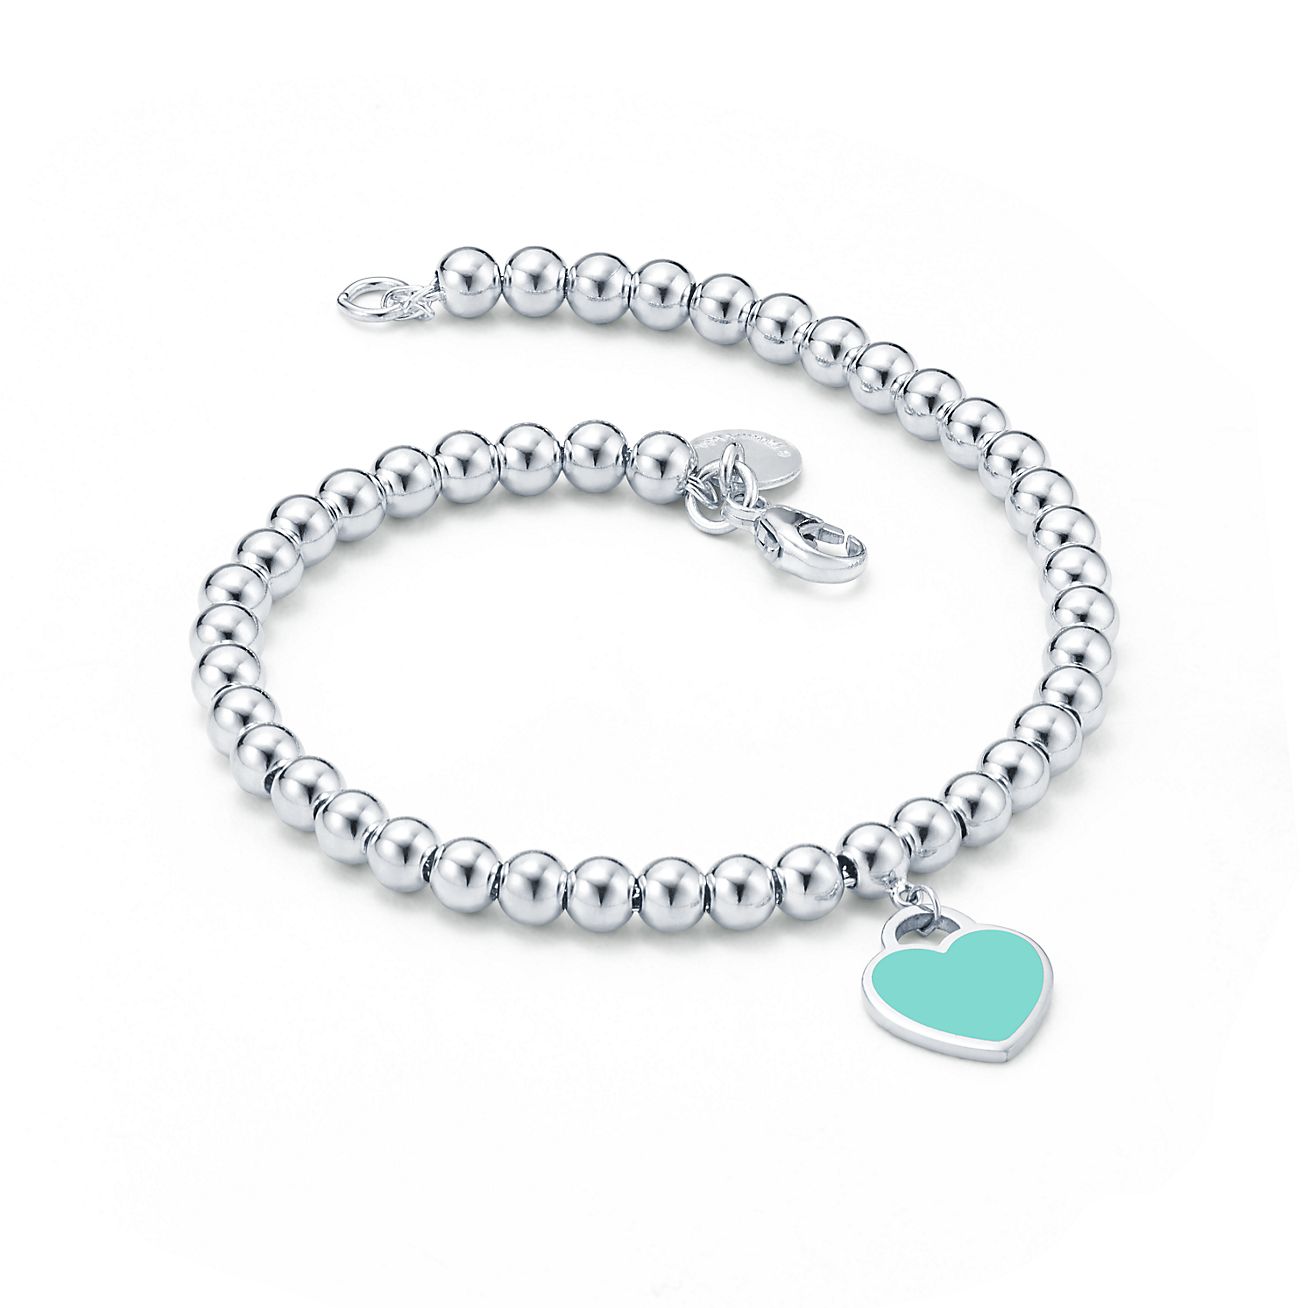 Return to Tiffany™ Heart Tag Bead Bracelet in Silver with a